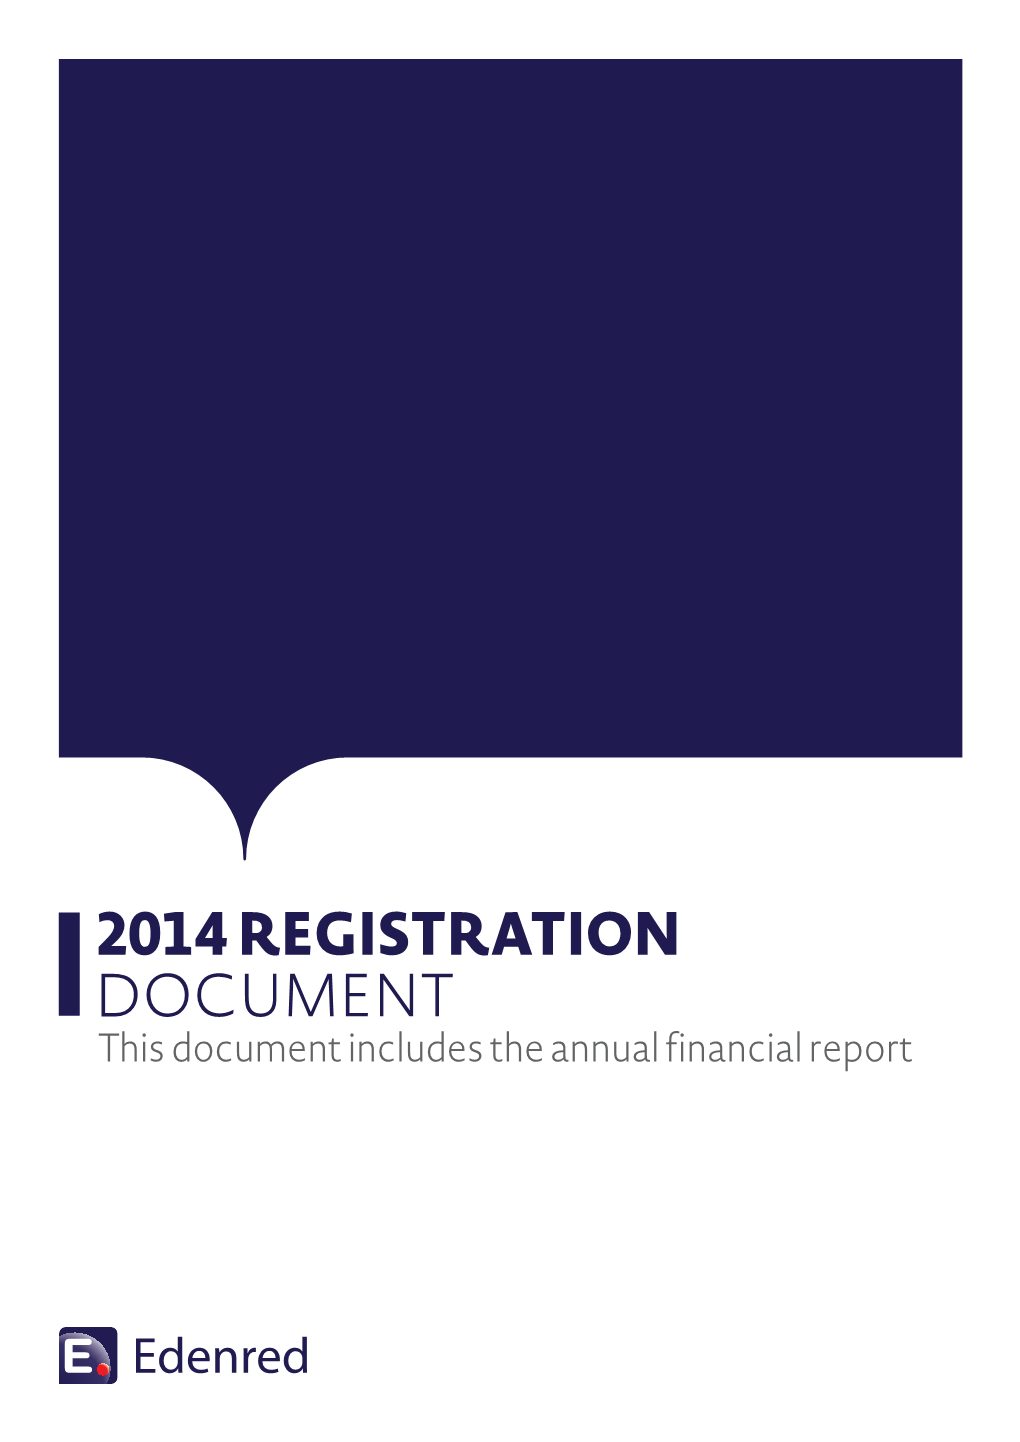 2014 REGISTRATION DOCUMENT This Document Includes the Annual Financial Report CONTENTS